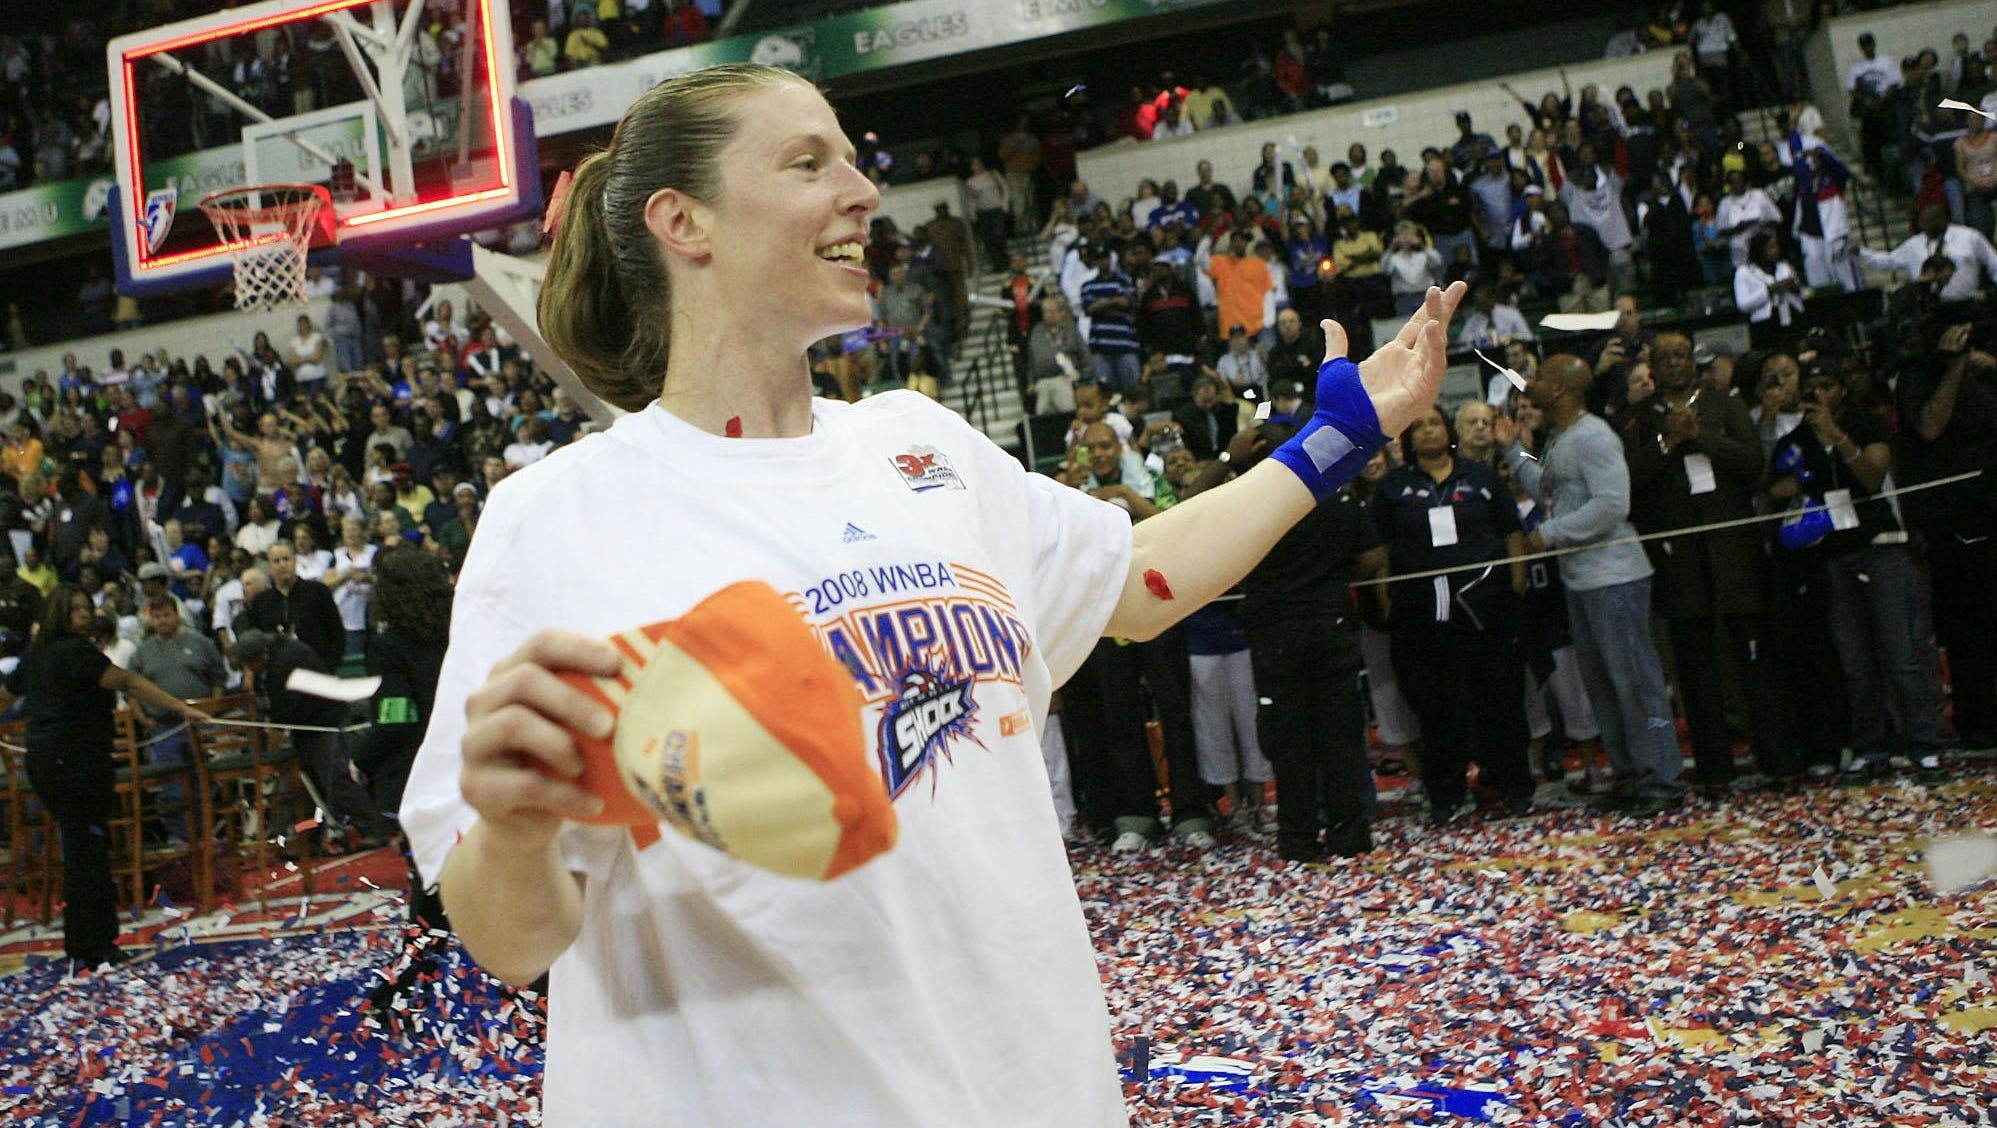 Pistons interested in bringing WNBA franchise back to Detroit, but don't expect that to happen anytime soon